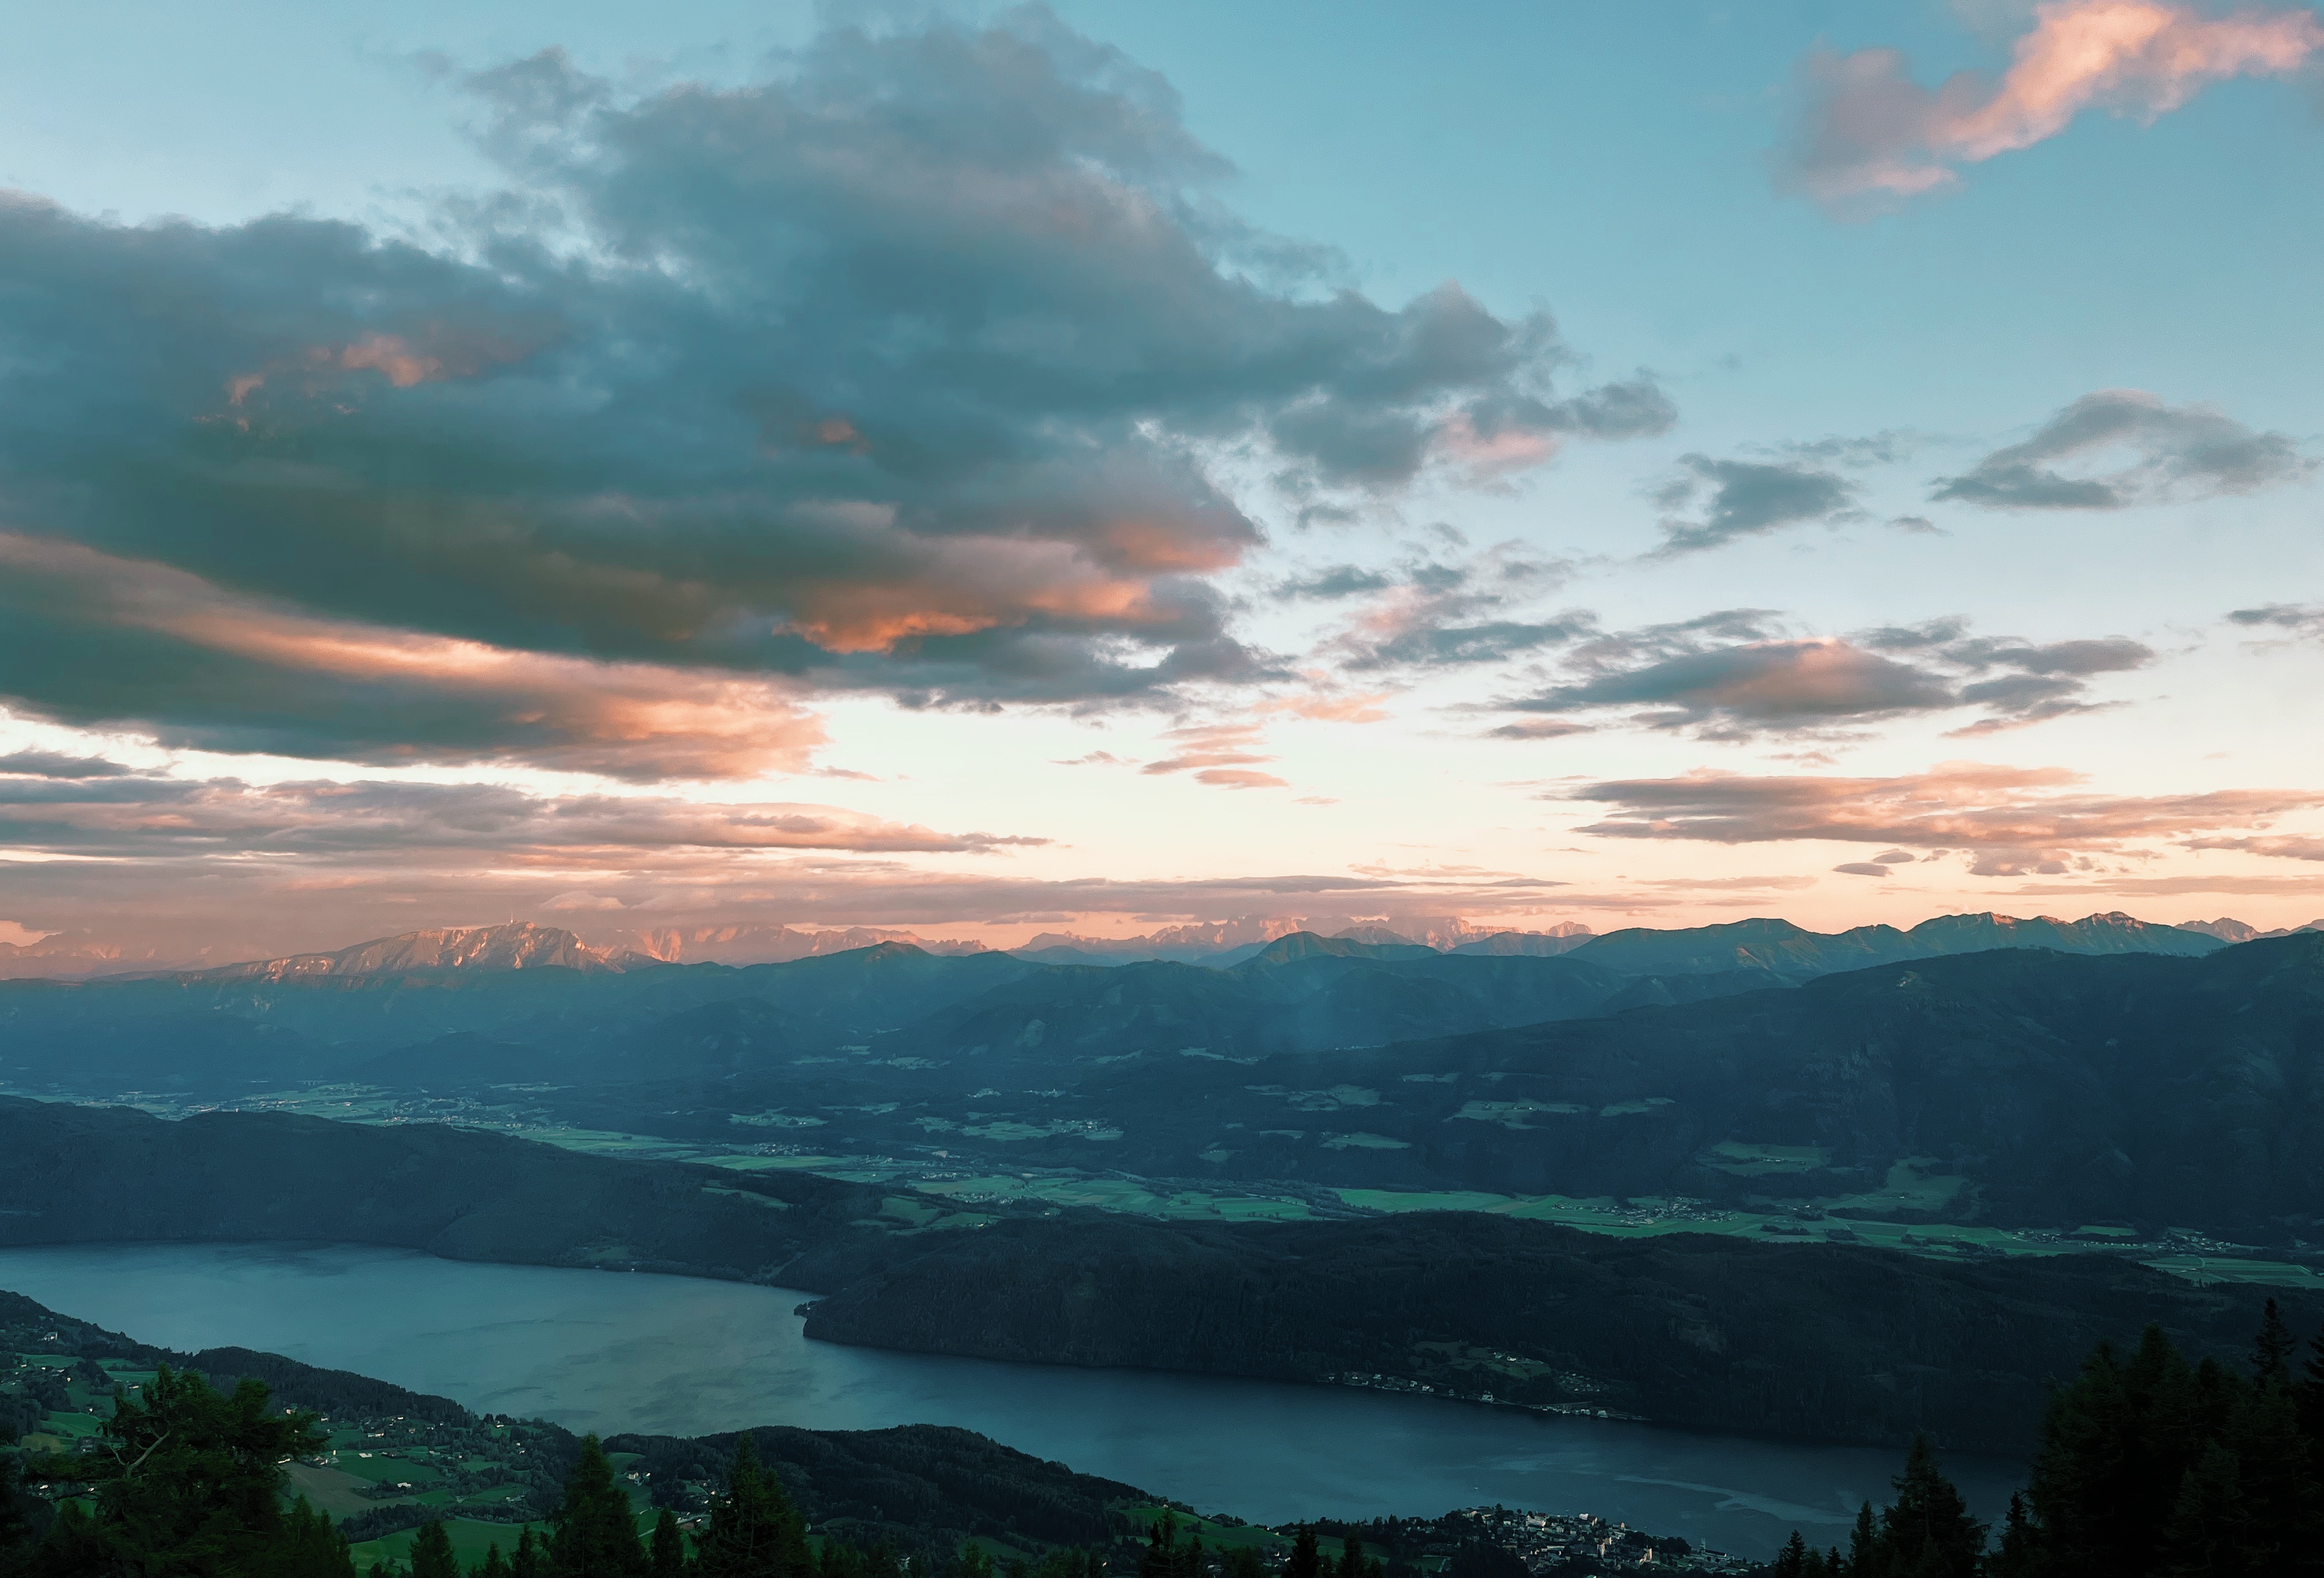 View of Millstätter See at sunset from Alexanderalm on the Alpe Adria Trail